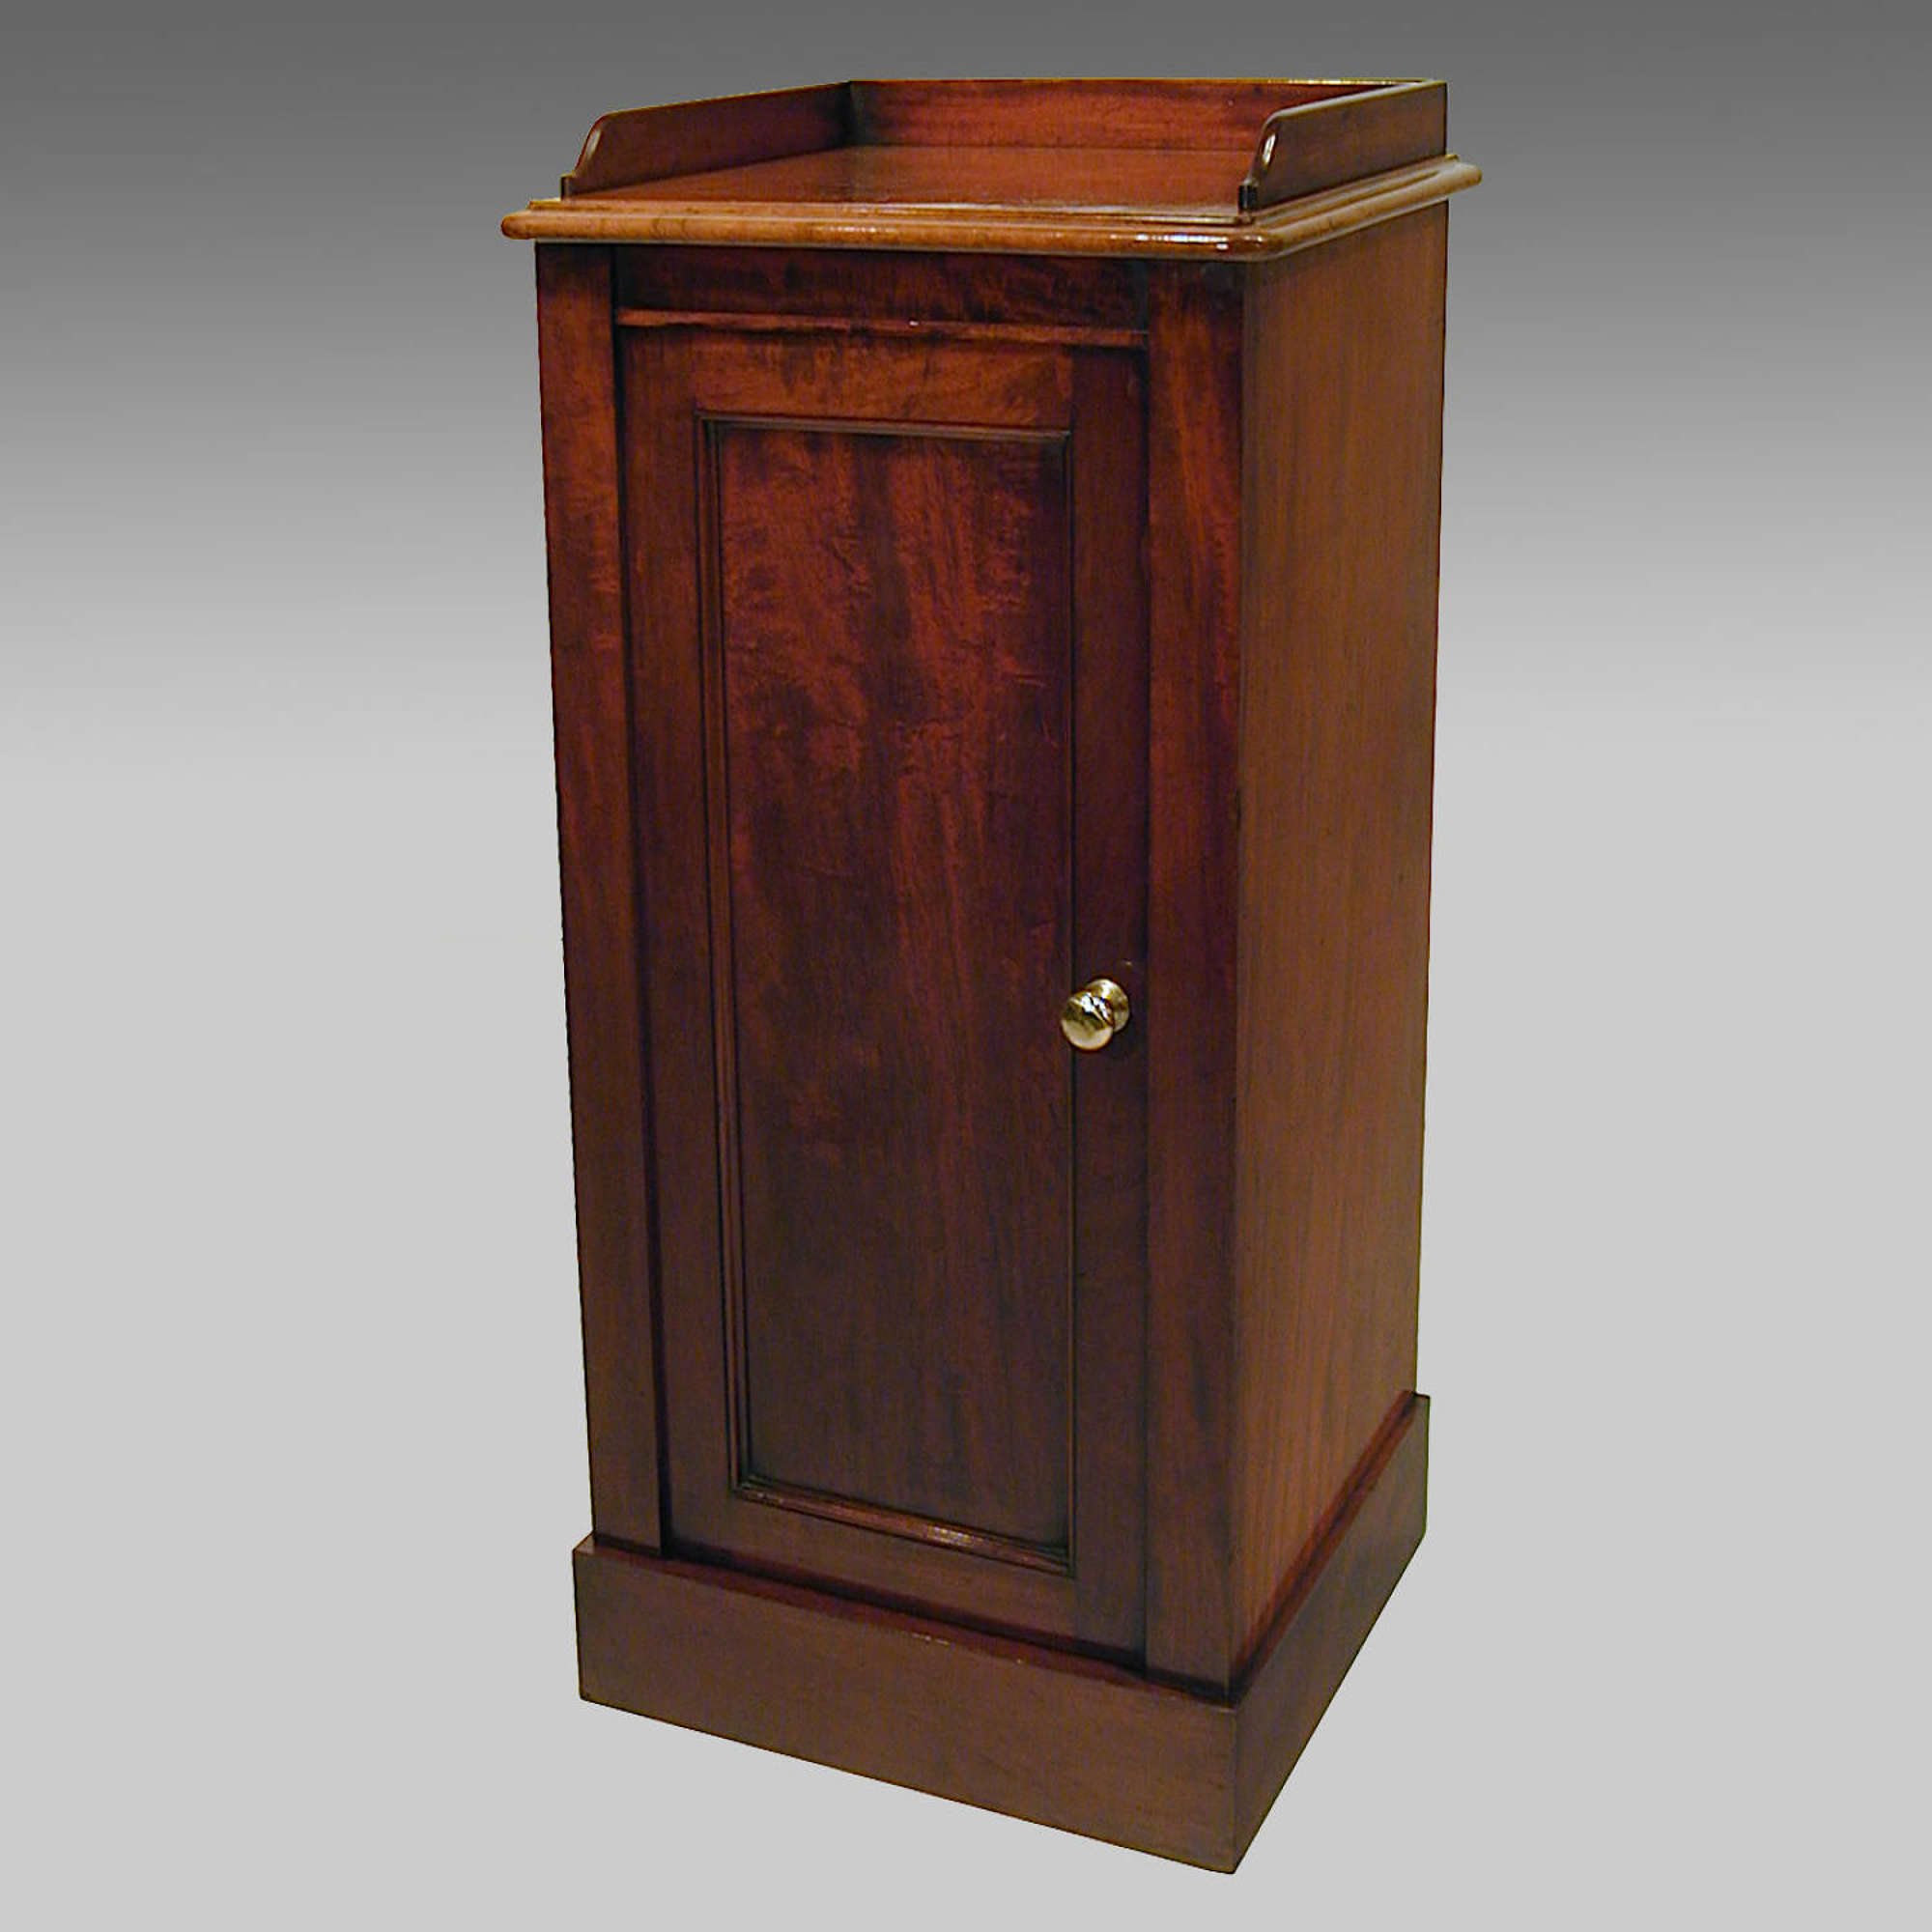 Mahogany pedestal cabinet by Holland & Sons